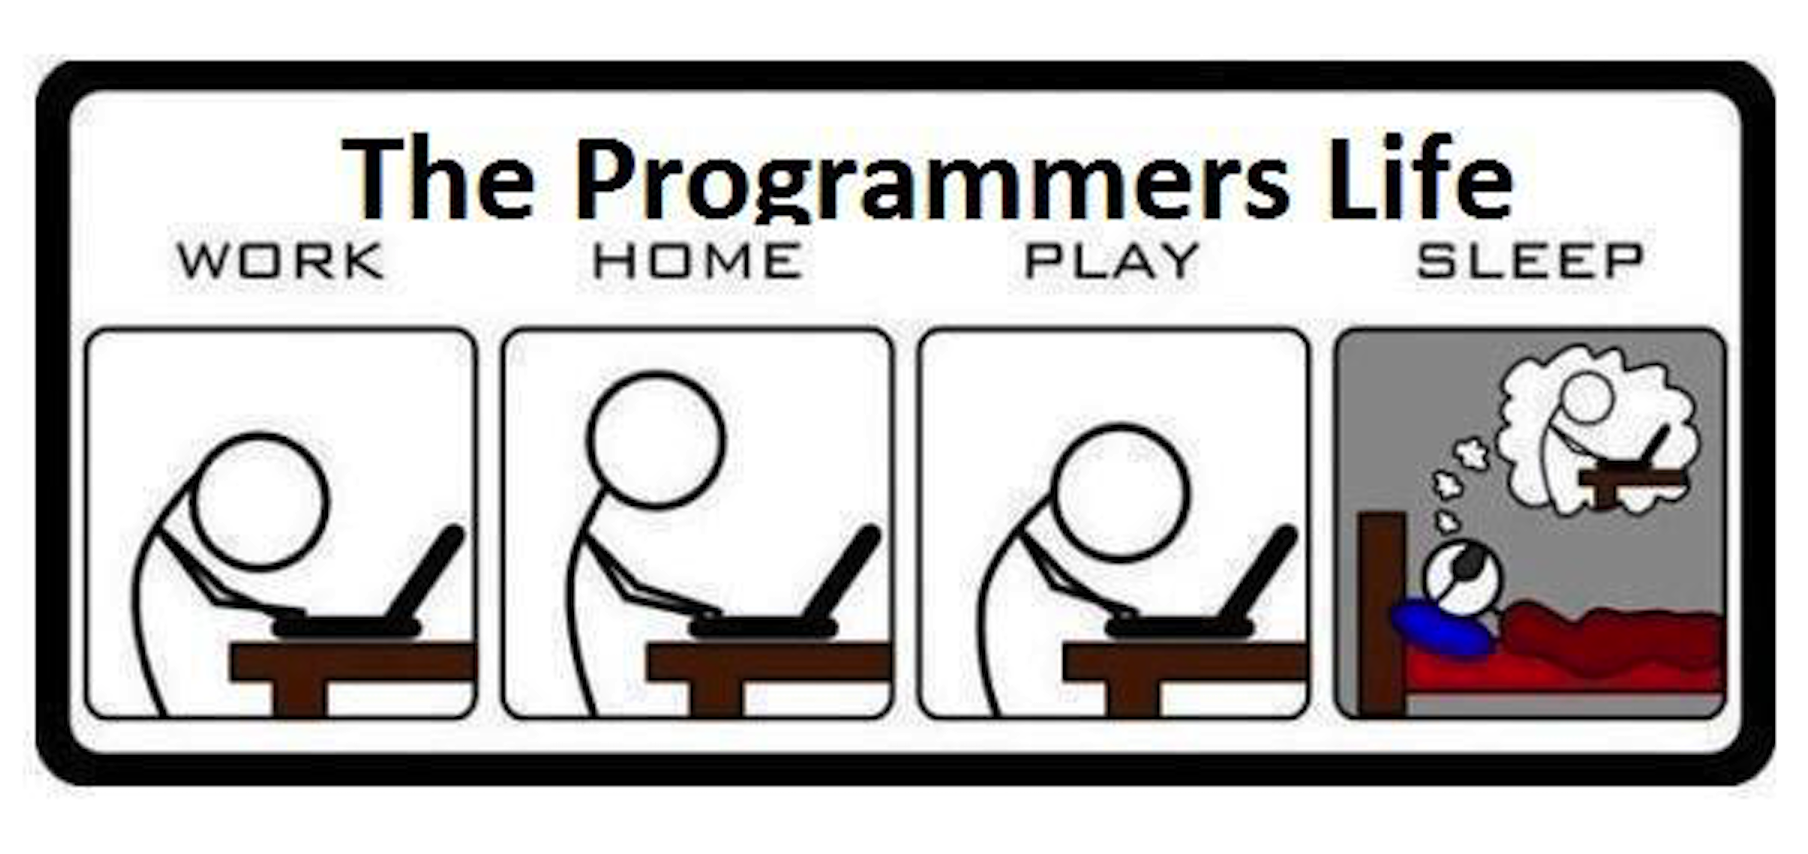 The Programmer's Life